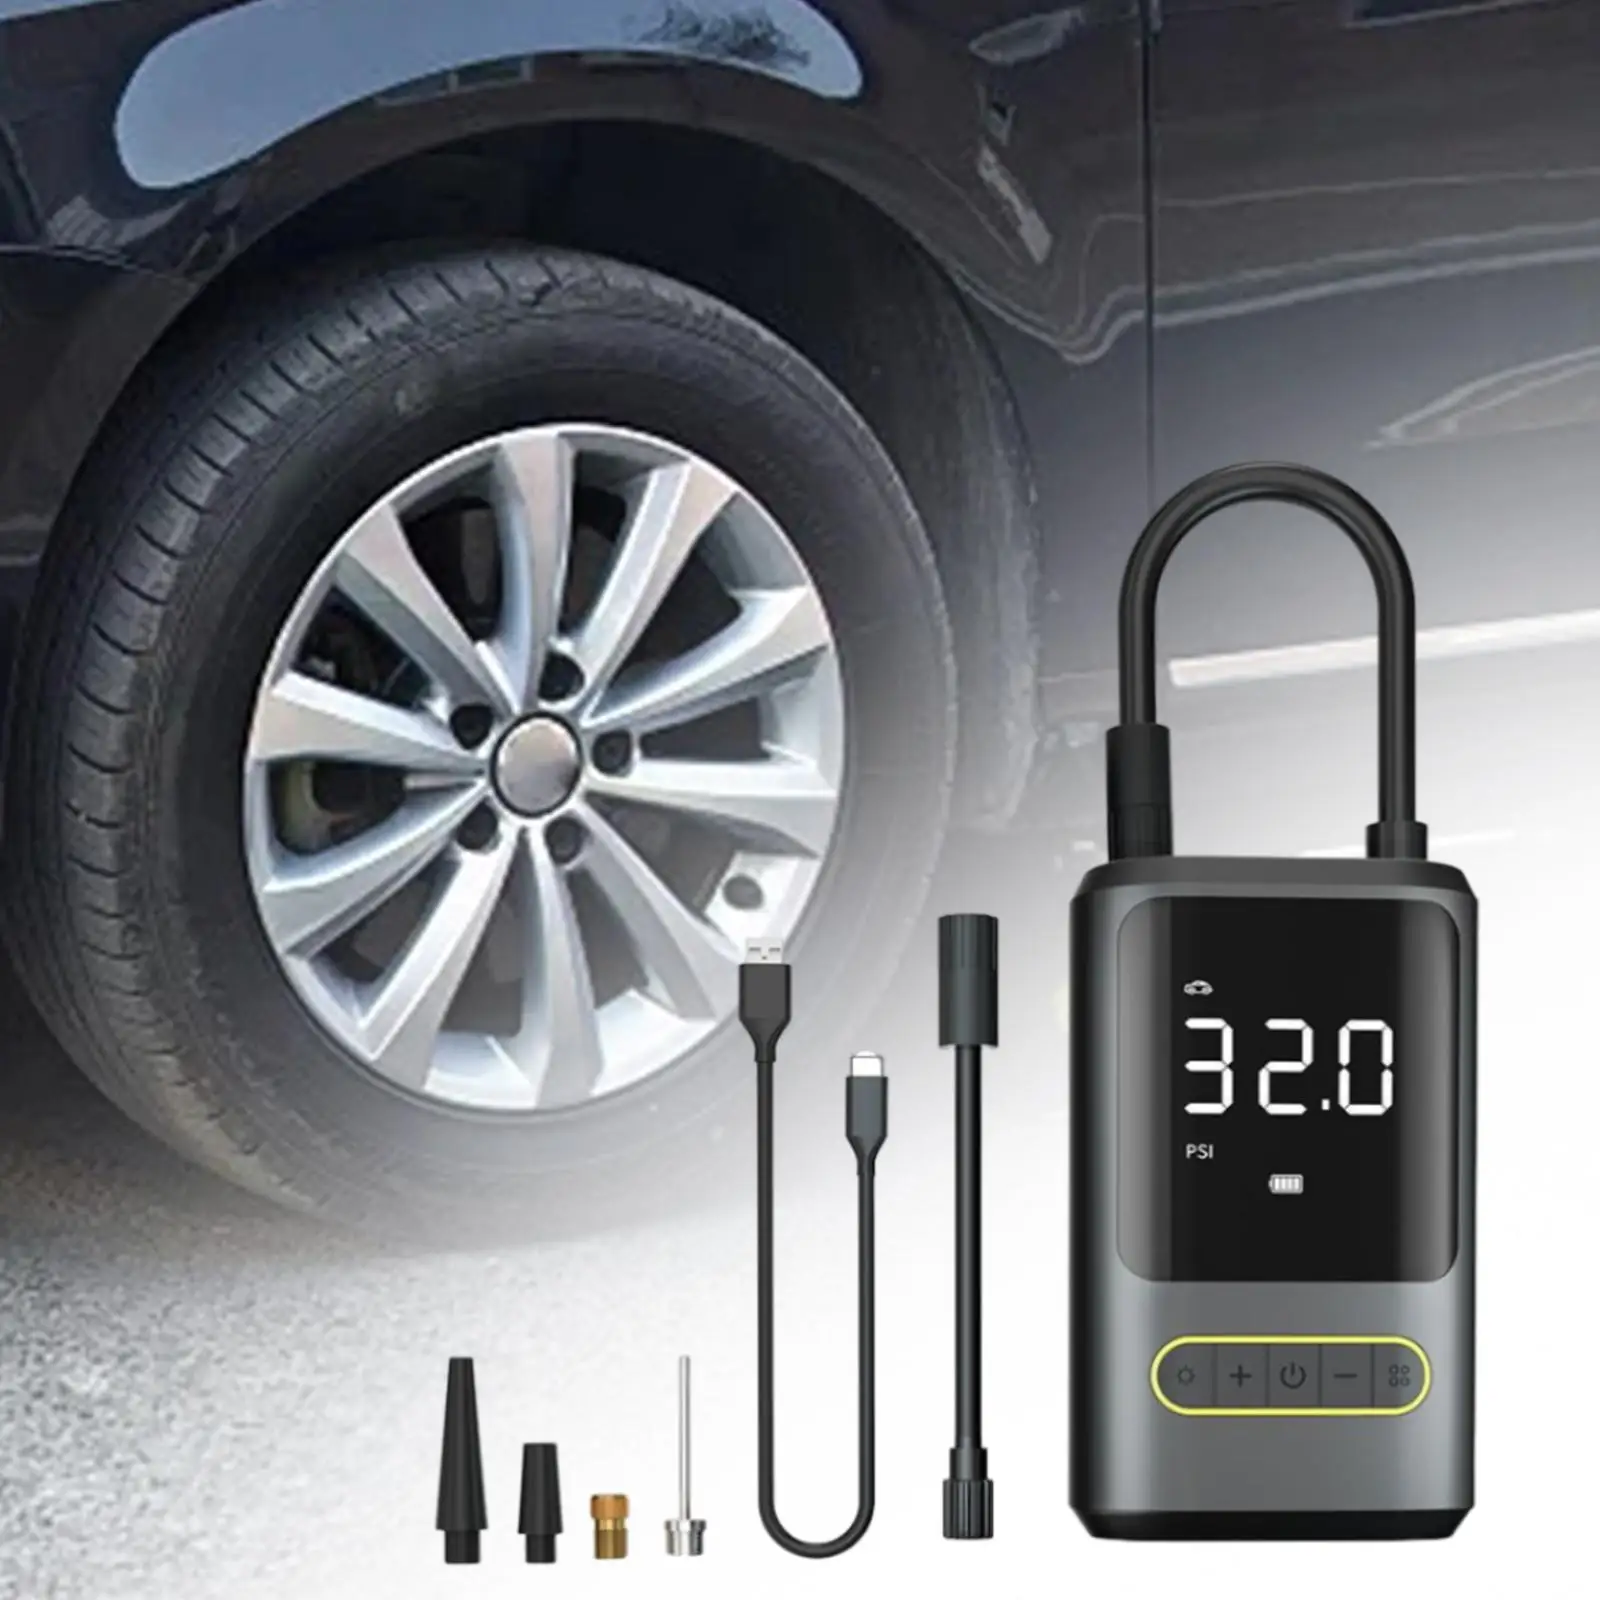 Automobile Tire Inflator Multi Purpose Small Illumination Charging Pump Tyre Inflator for Cars Truck SUV Balls Motorcycles